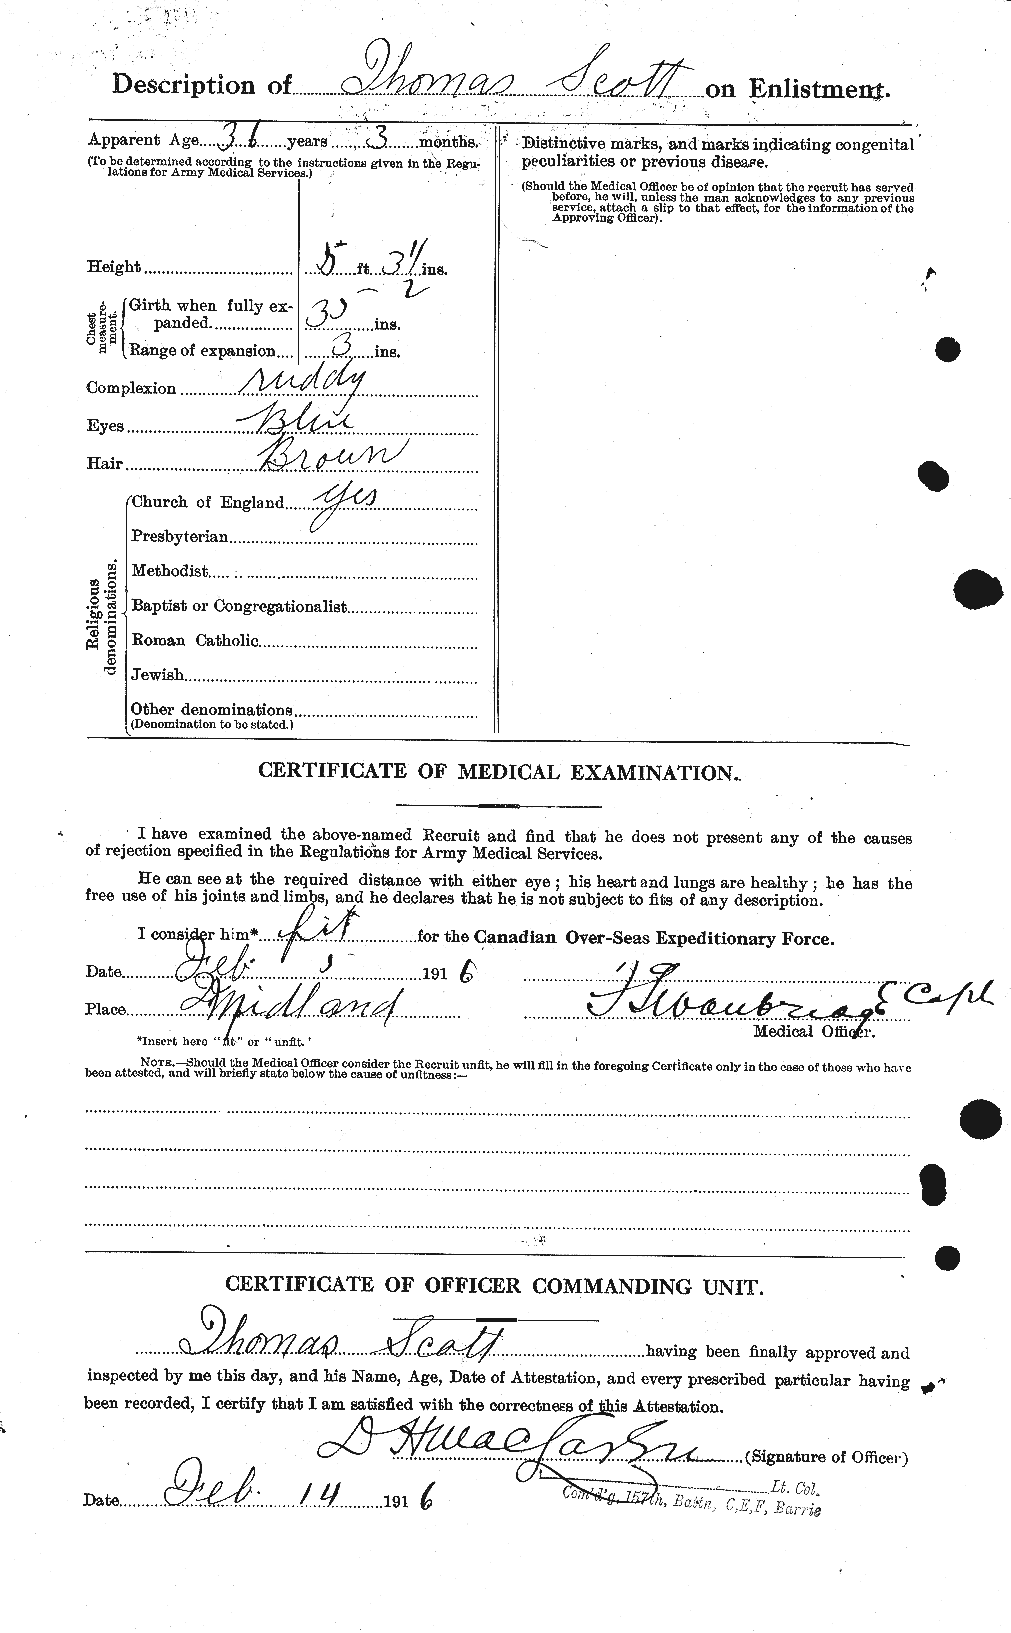 Personnel Records of the First World War - CEF 088529b